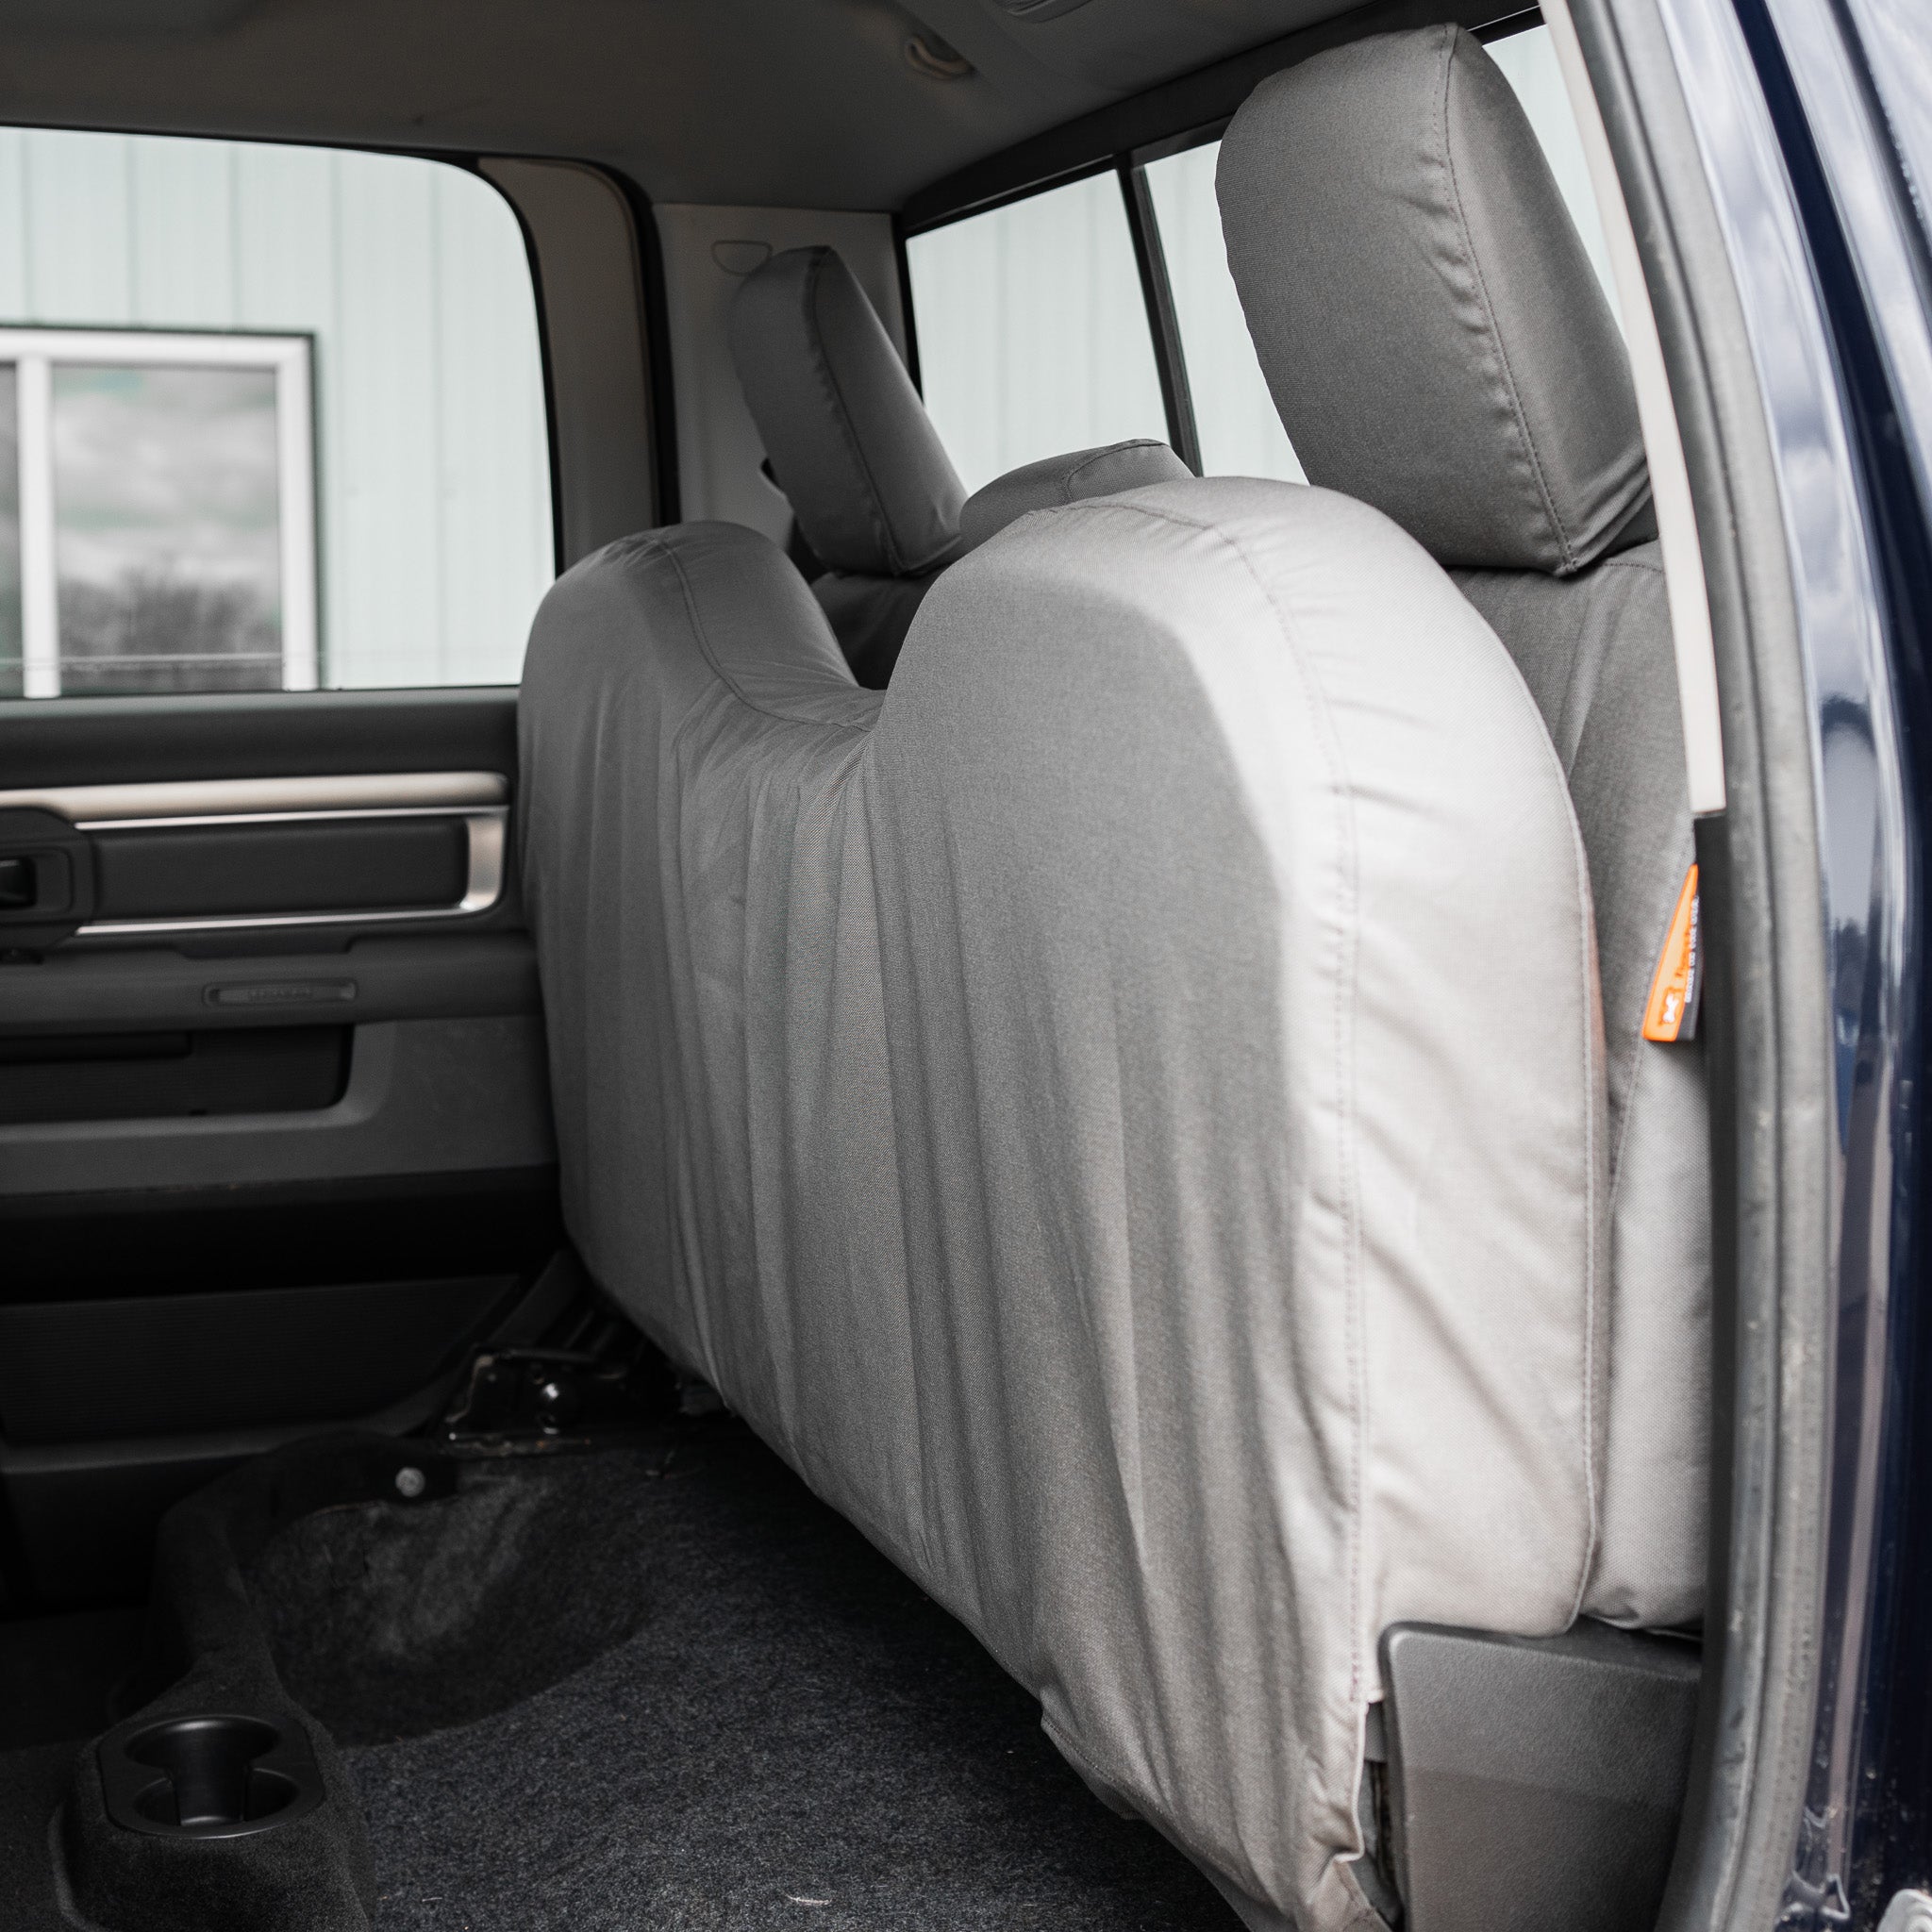 Photo showing how this TigerTough seat cover for the RAM full bench seat covers the entire underside of the seat, which is great if you carry dogs or tools or anything in the back with that seat folded up.